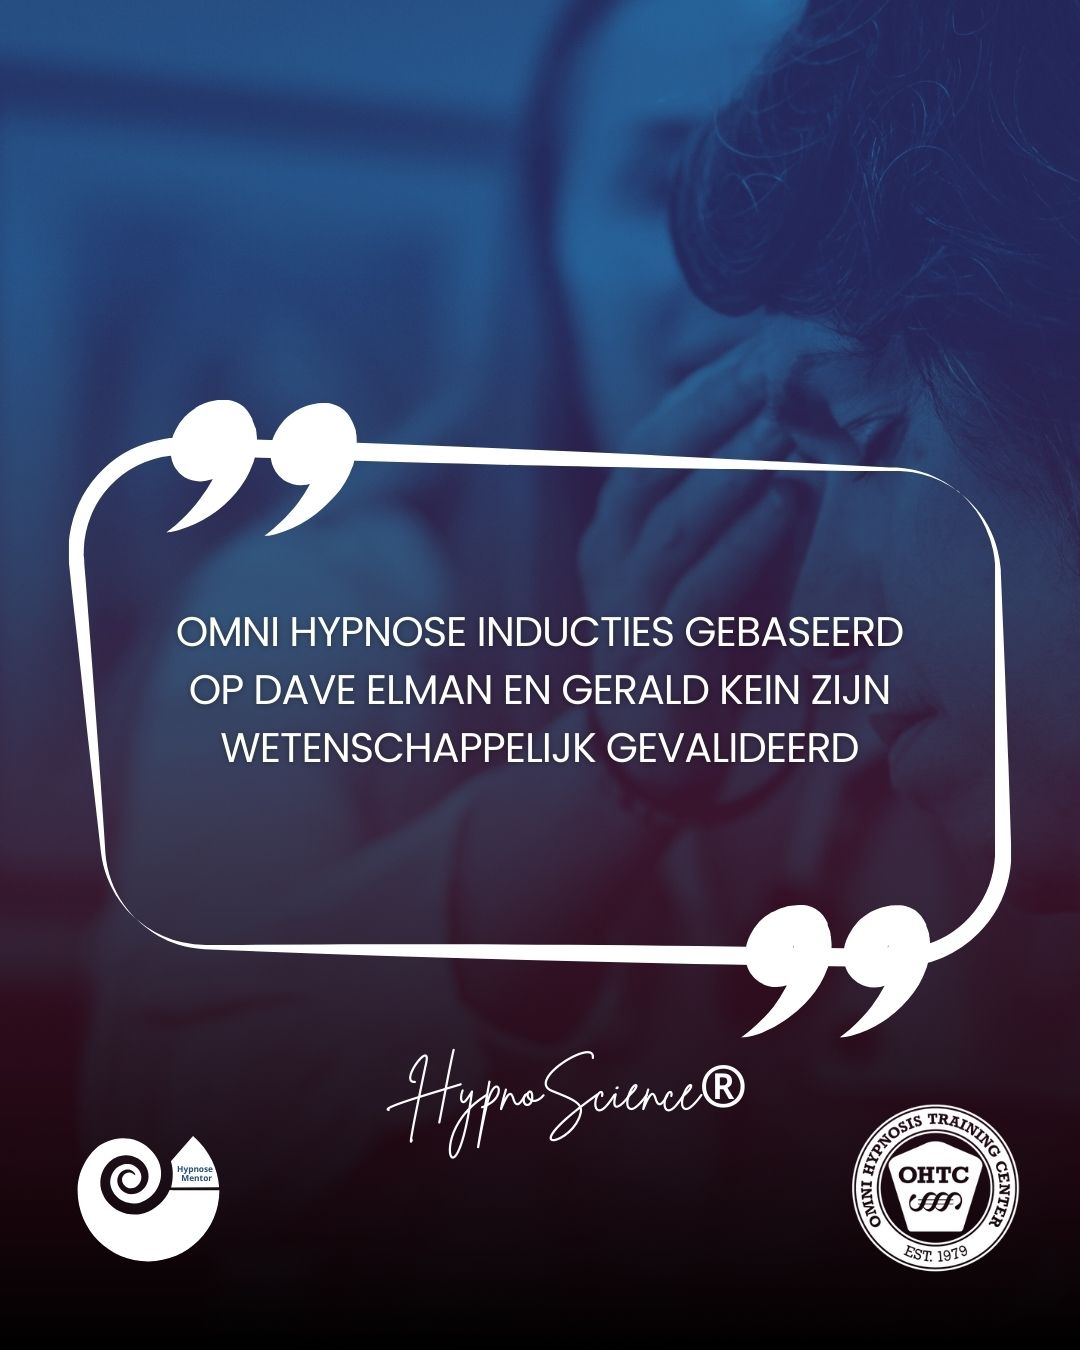 visual of putting someone into hypnosis with quote